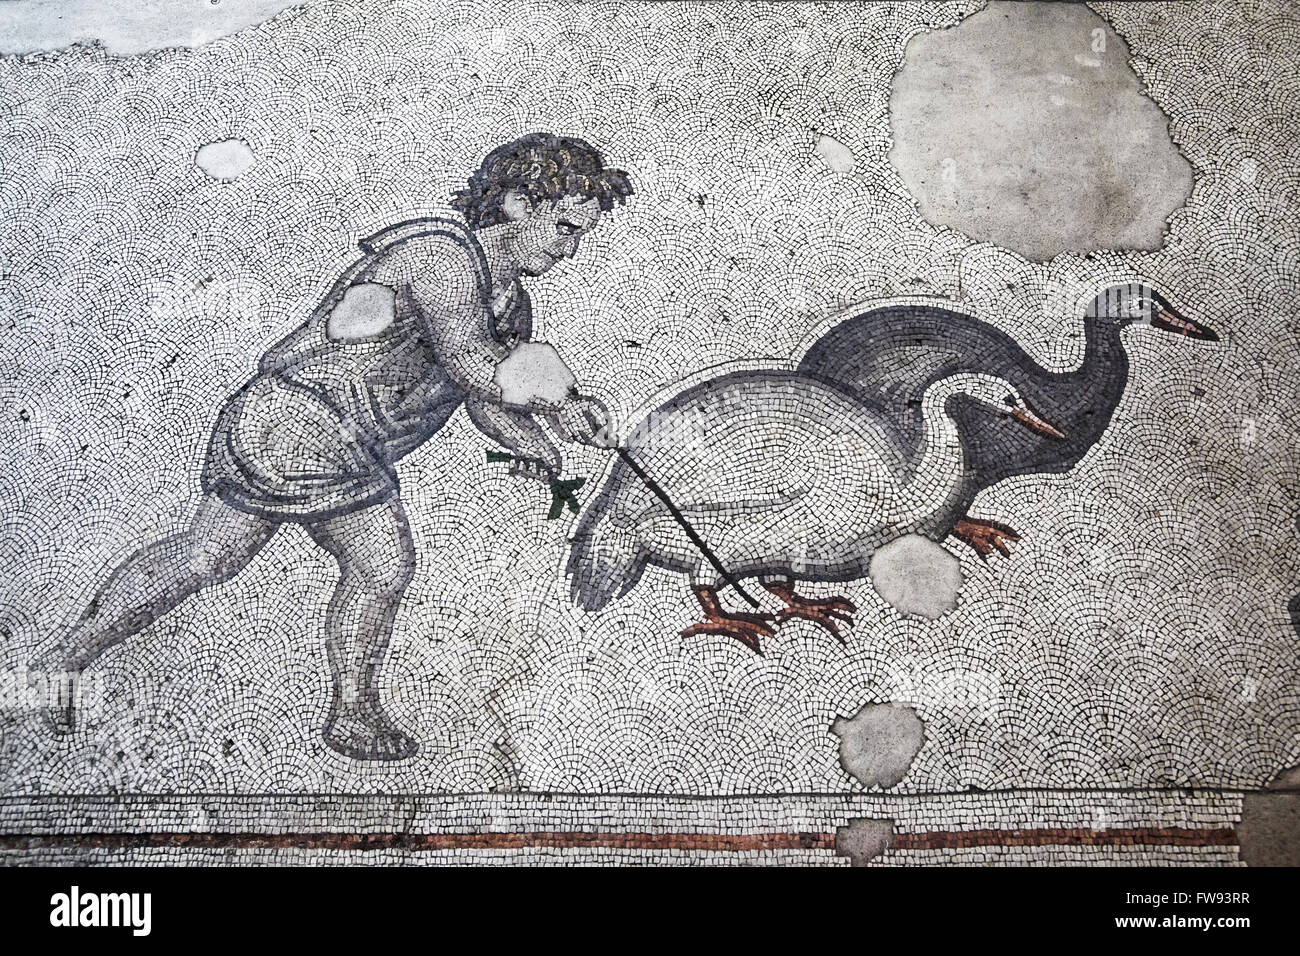 Ancient roman mosaic from the Great Palace of Constantinople depicting a boy herding geese. Stock Photo